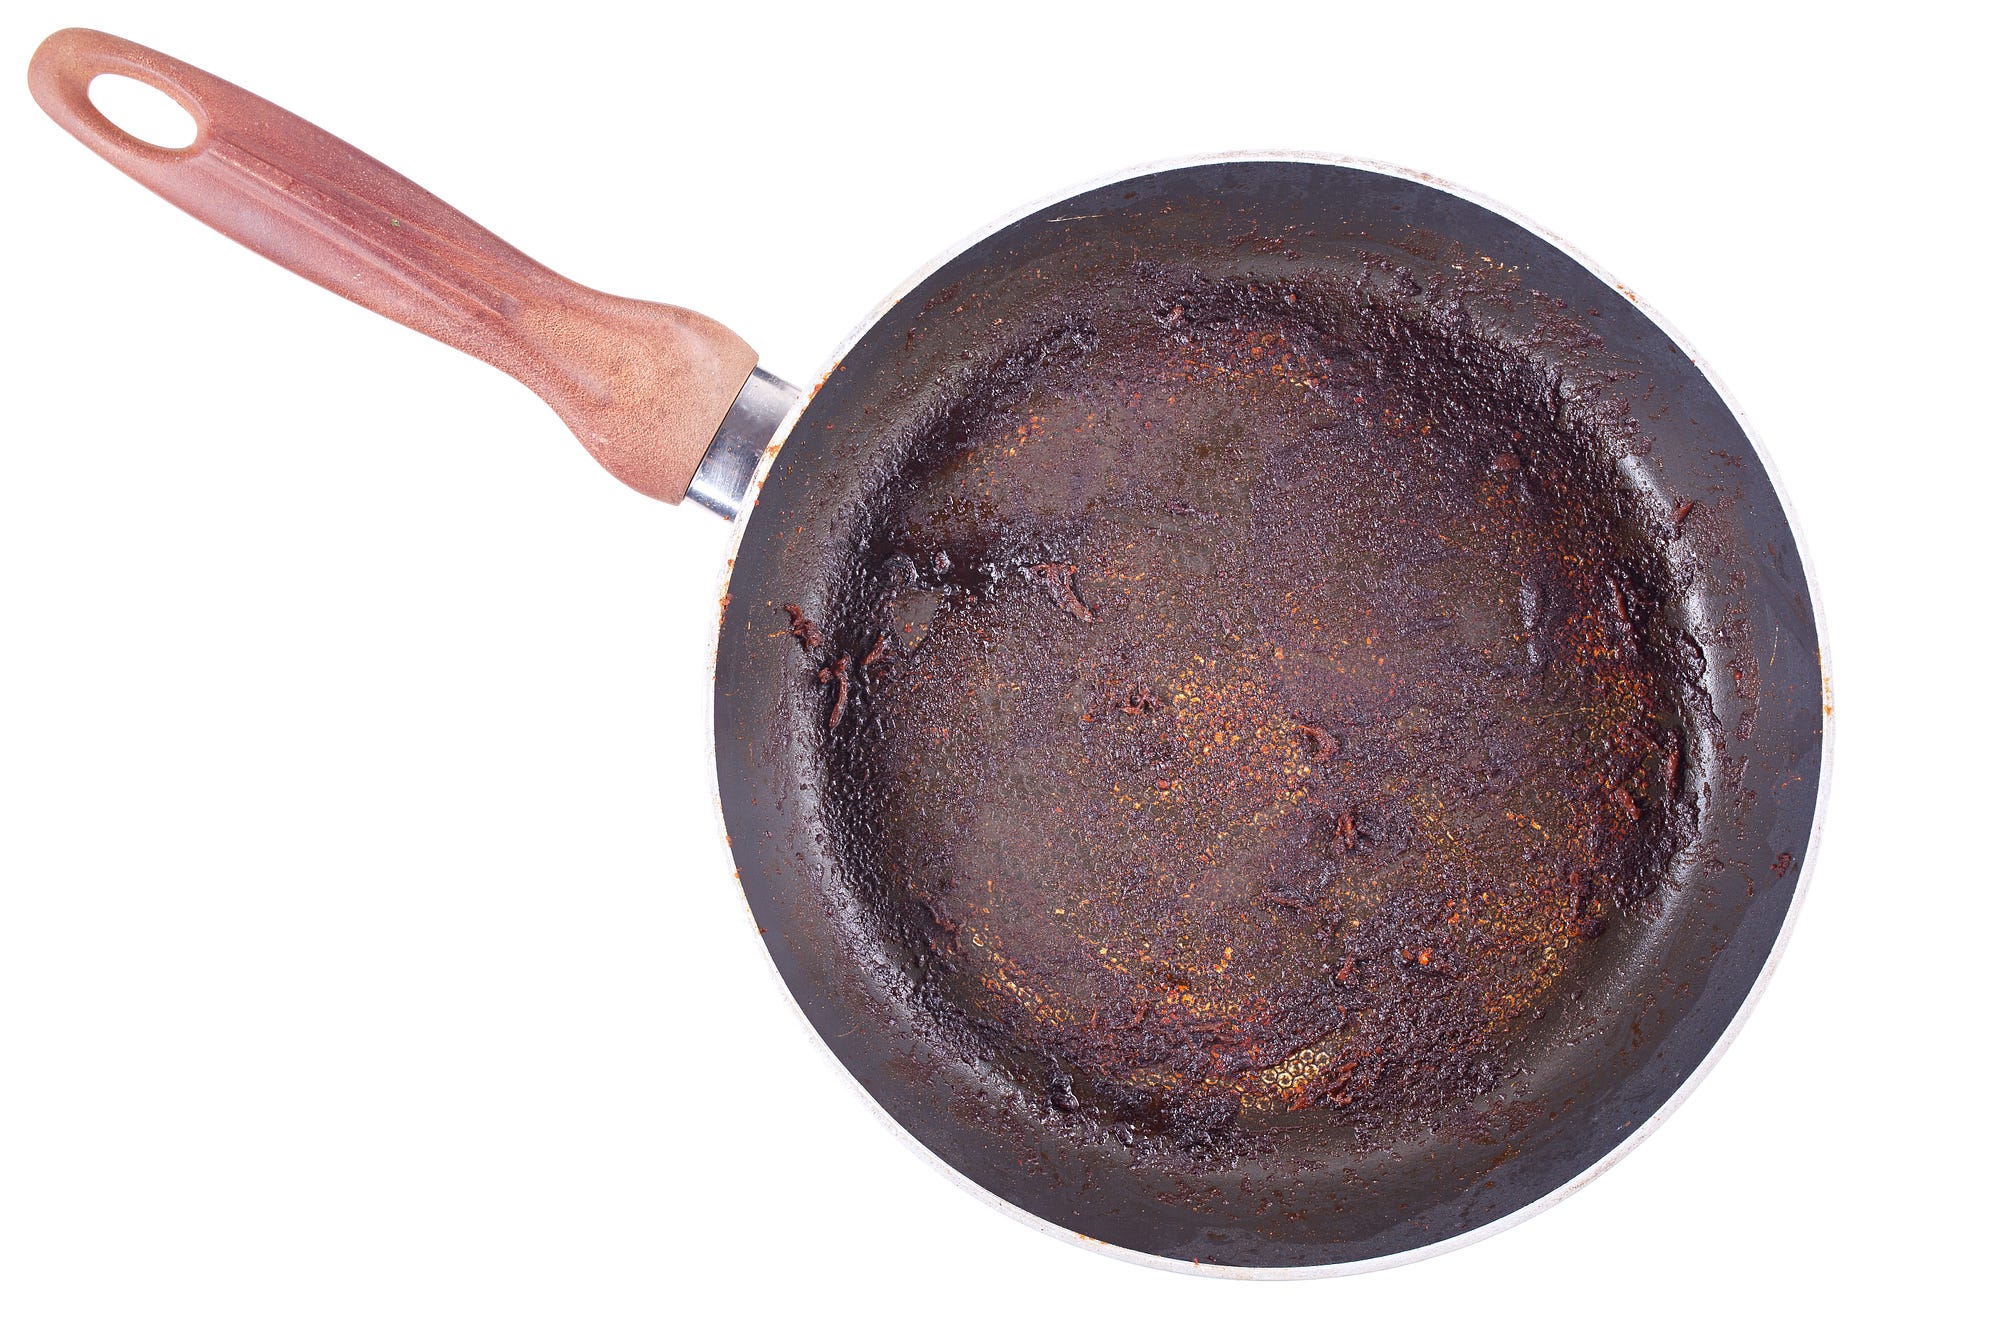 How to Cook with Nonstick Pans Without Damaging Them